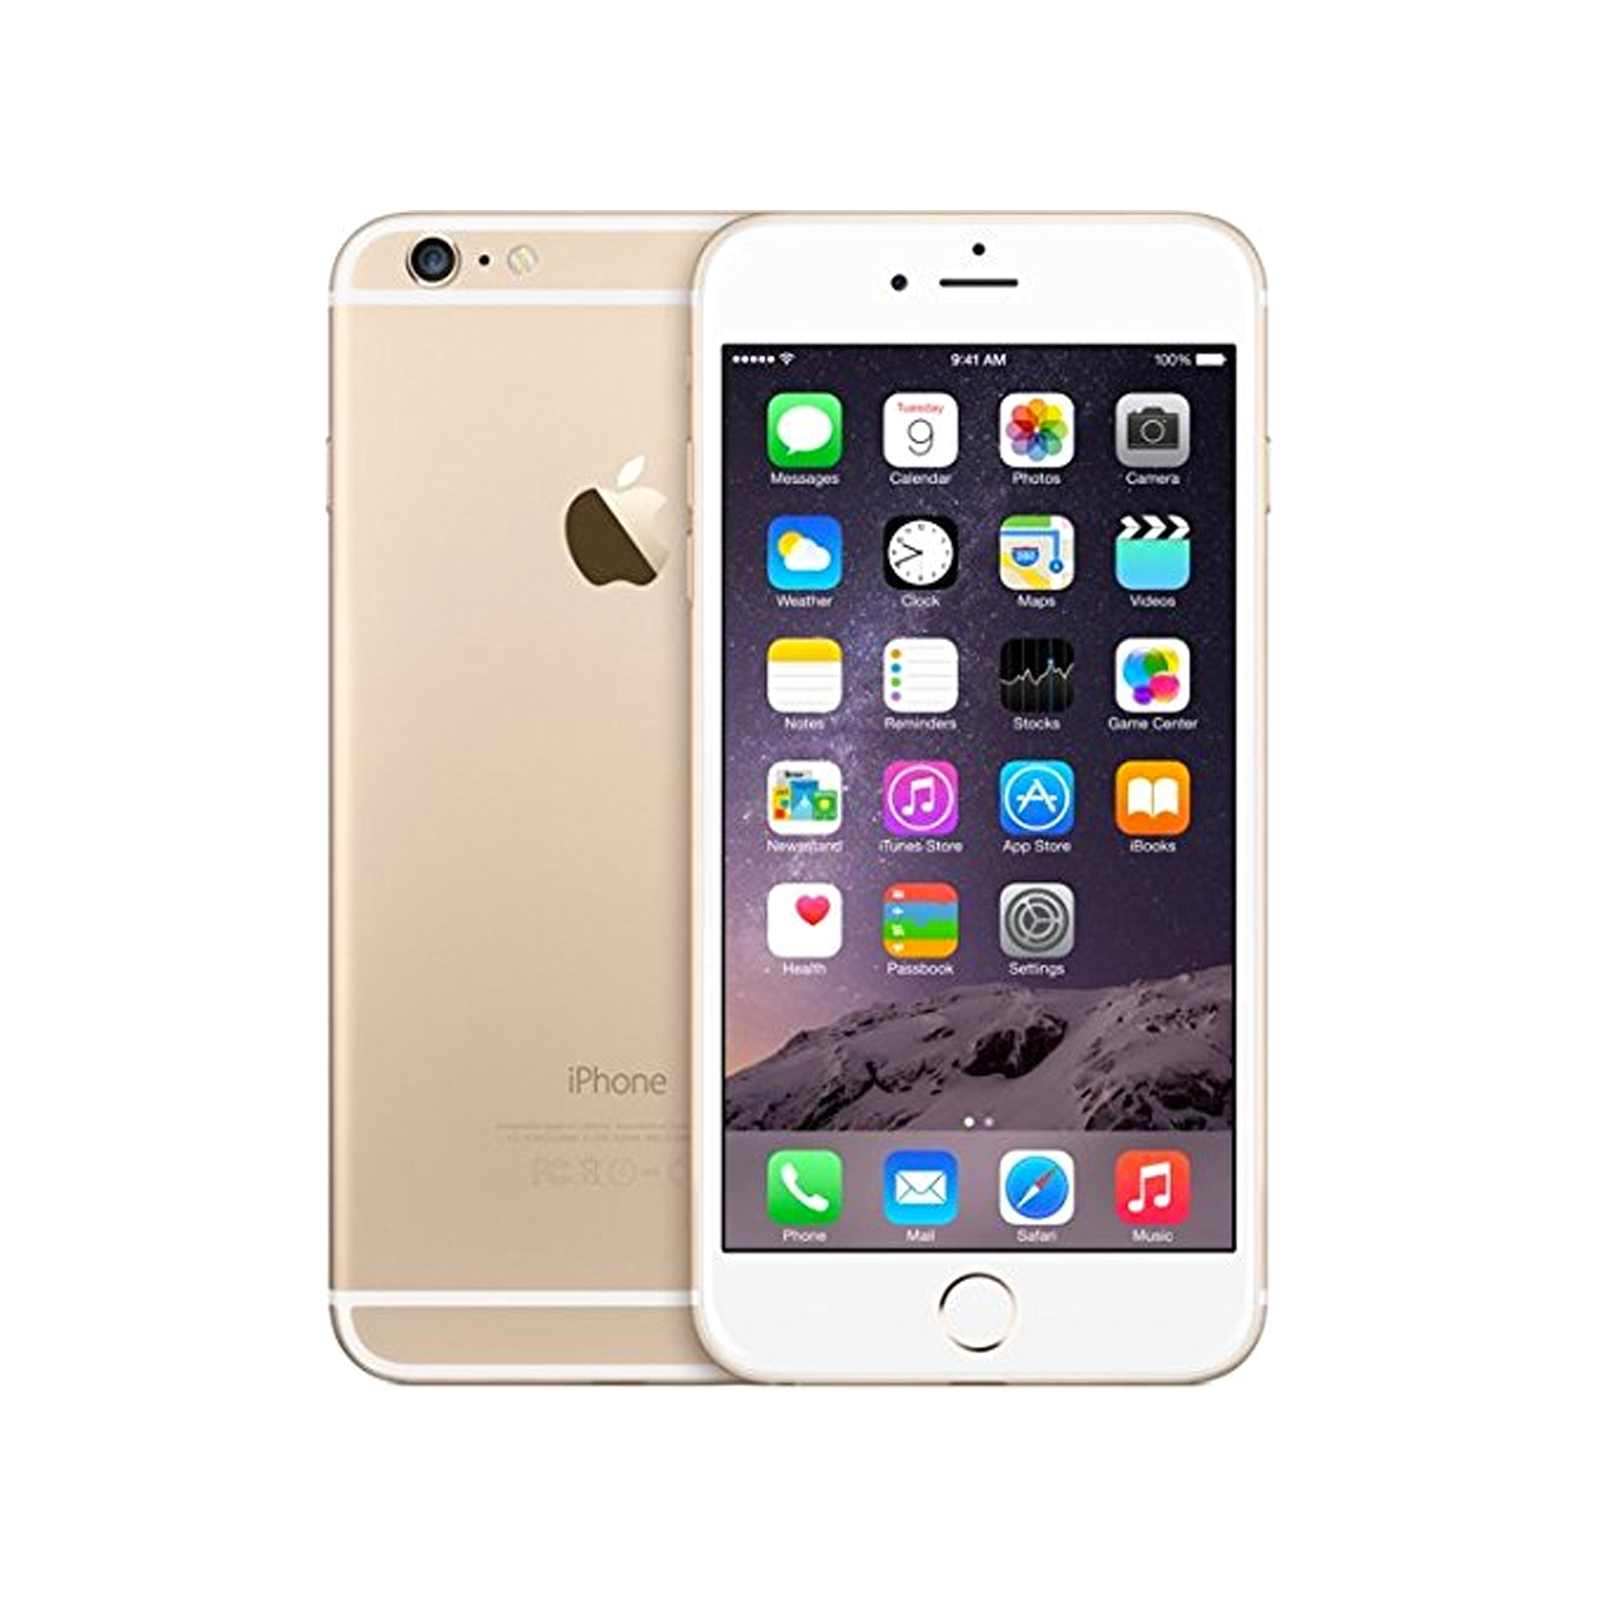 Apple 128GB iPhone 6 Plus Unlocked with AT&T - White/Gold